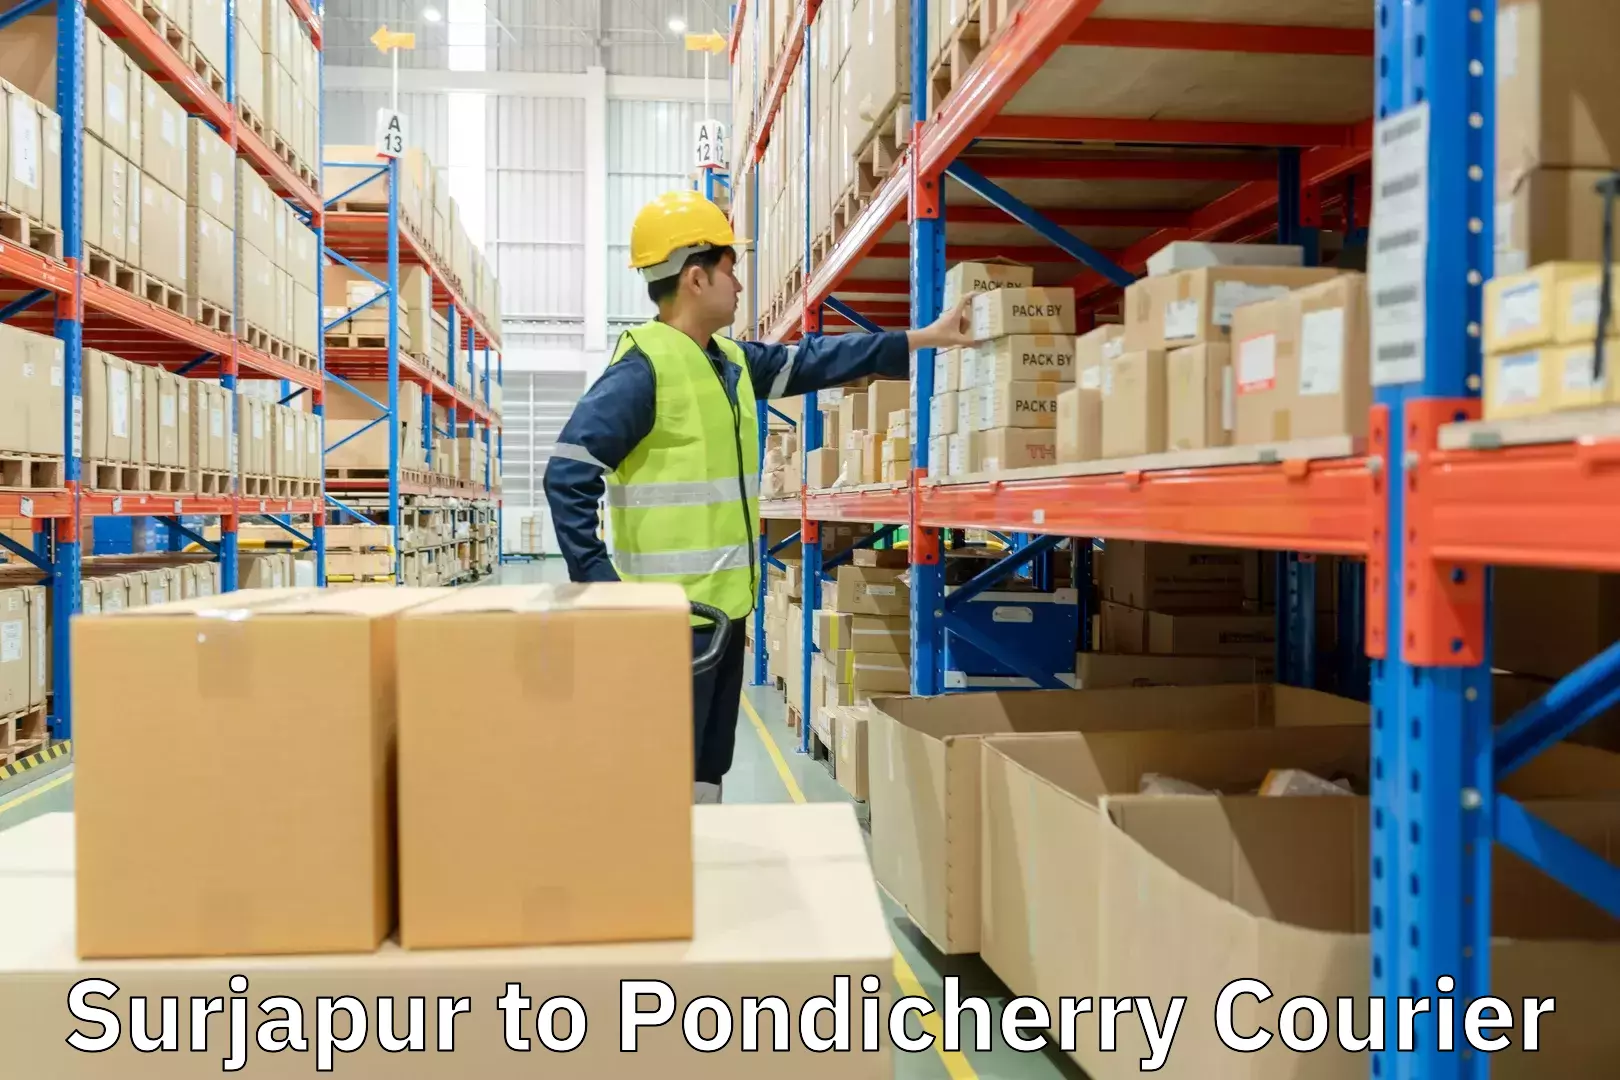 Residential courier service Surjapur to Pondicherry